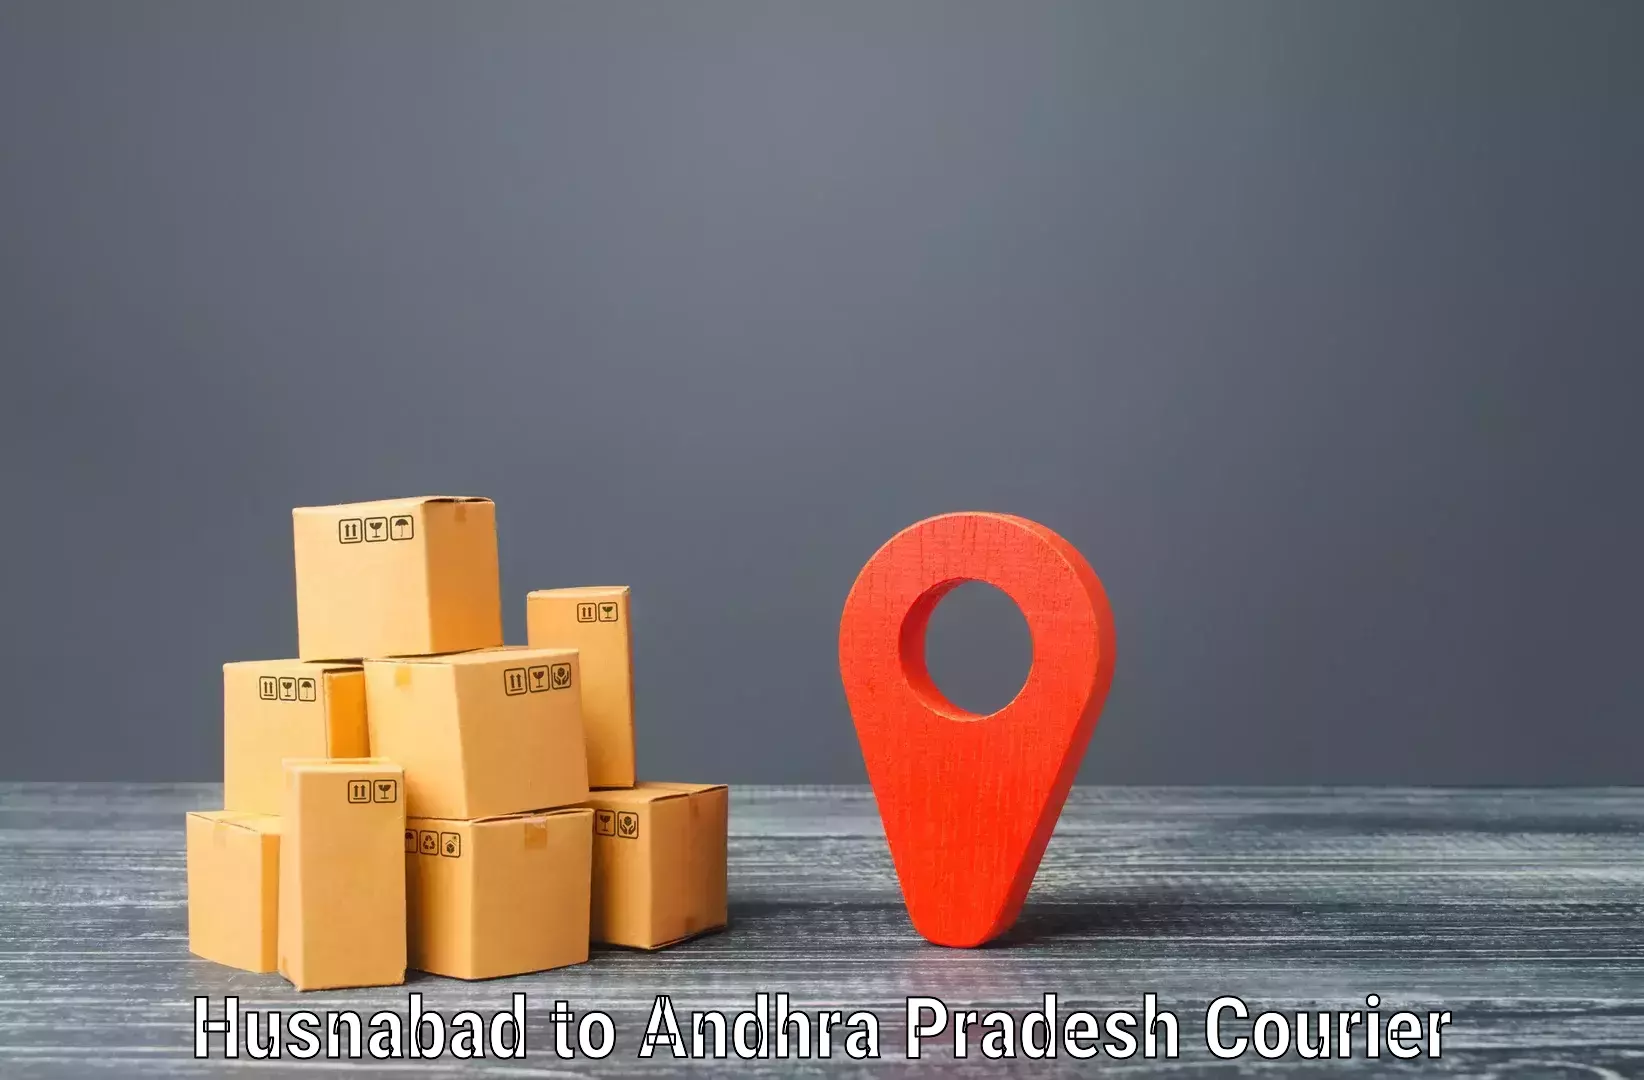 Advanced shipping technology Husnabad to Ongole